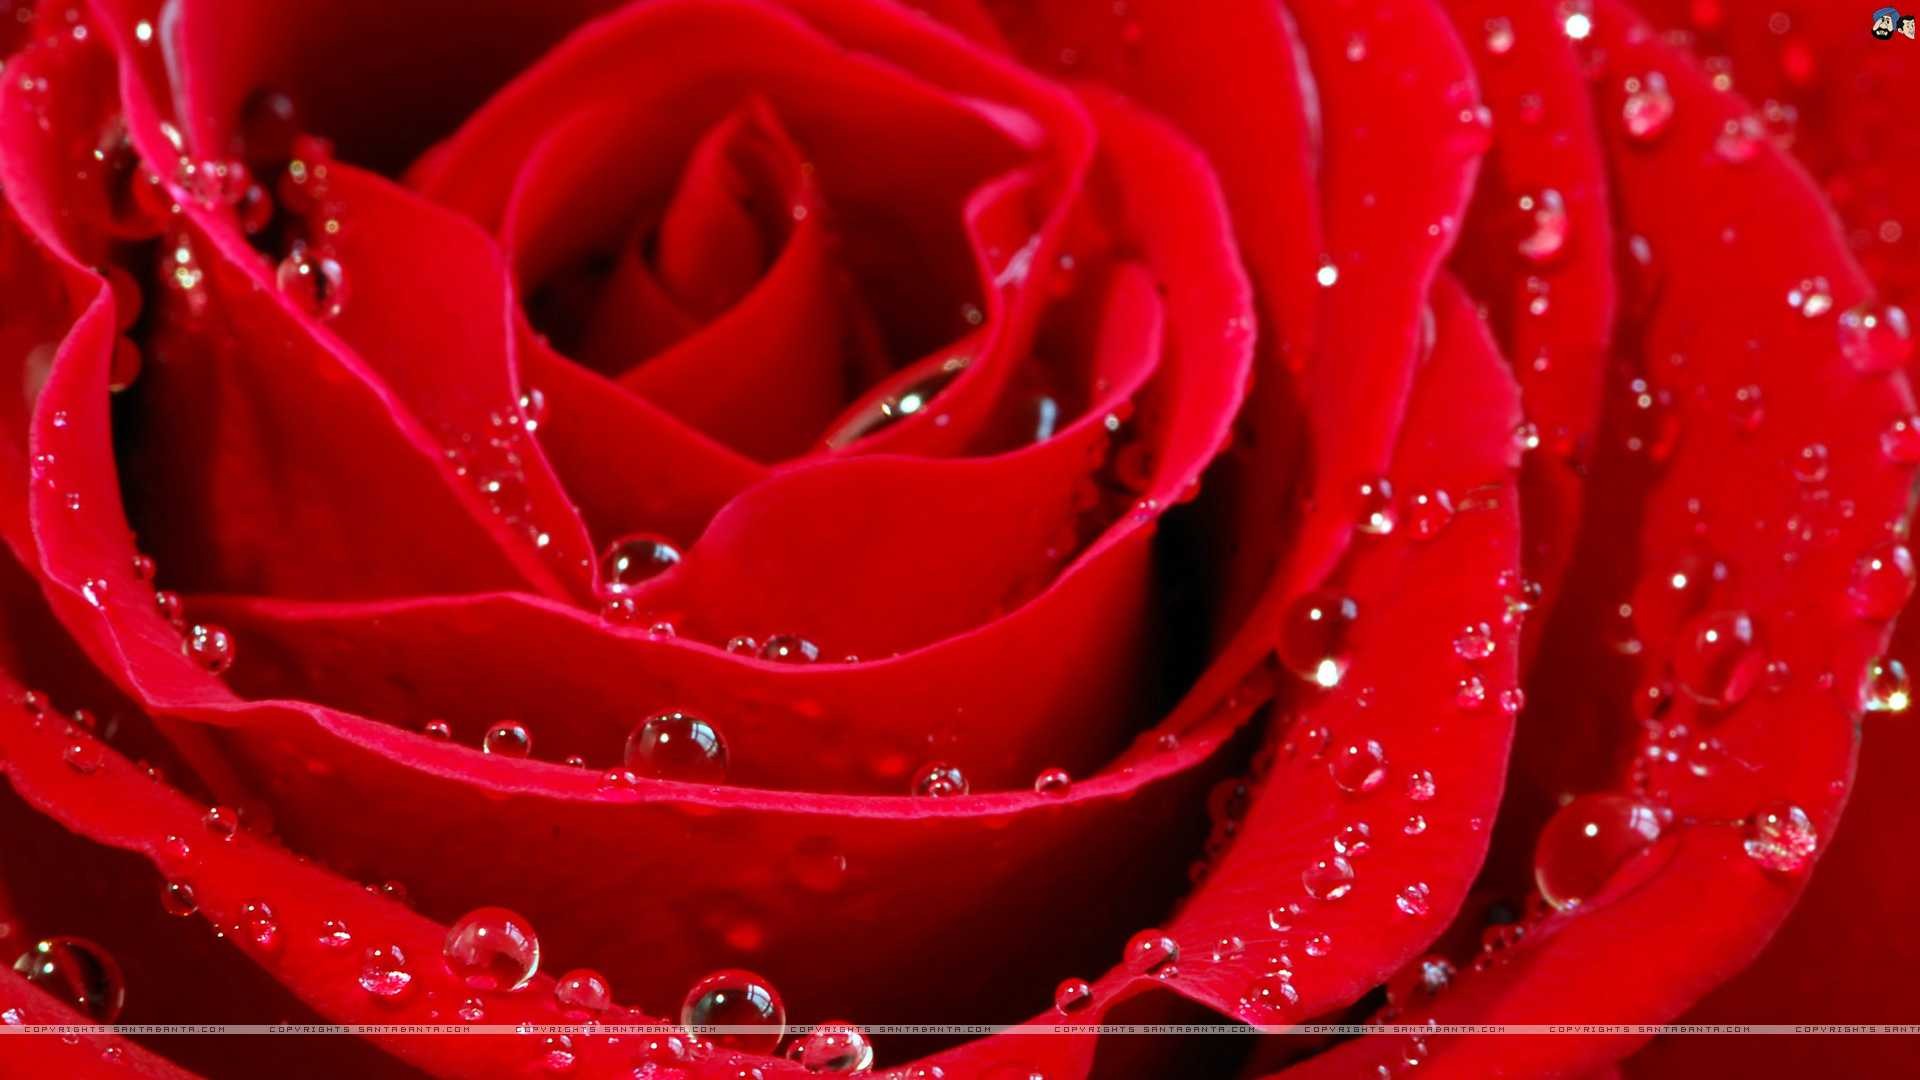 1920x1080, Photos For Red Rose Wallpaper 3d High Resolution - Red Rose Flowers Wallpapers Free Download - HD Wallpaper 